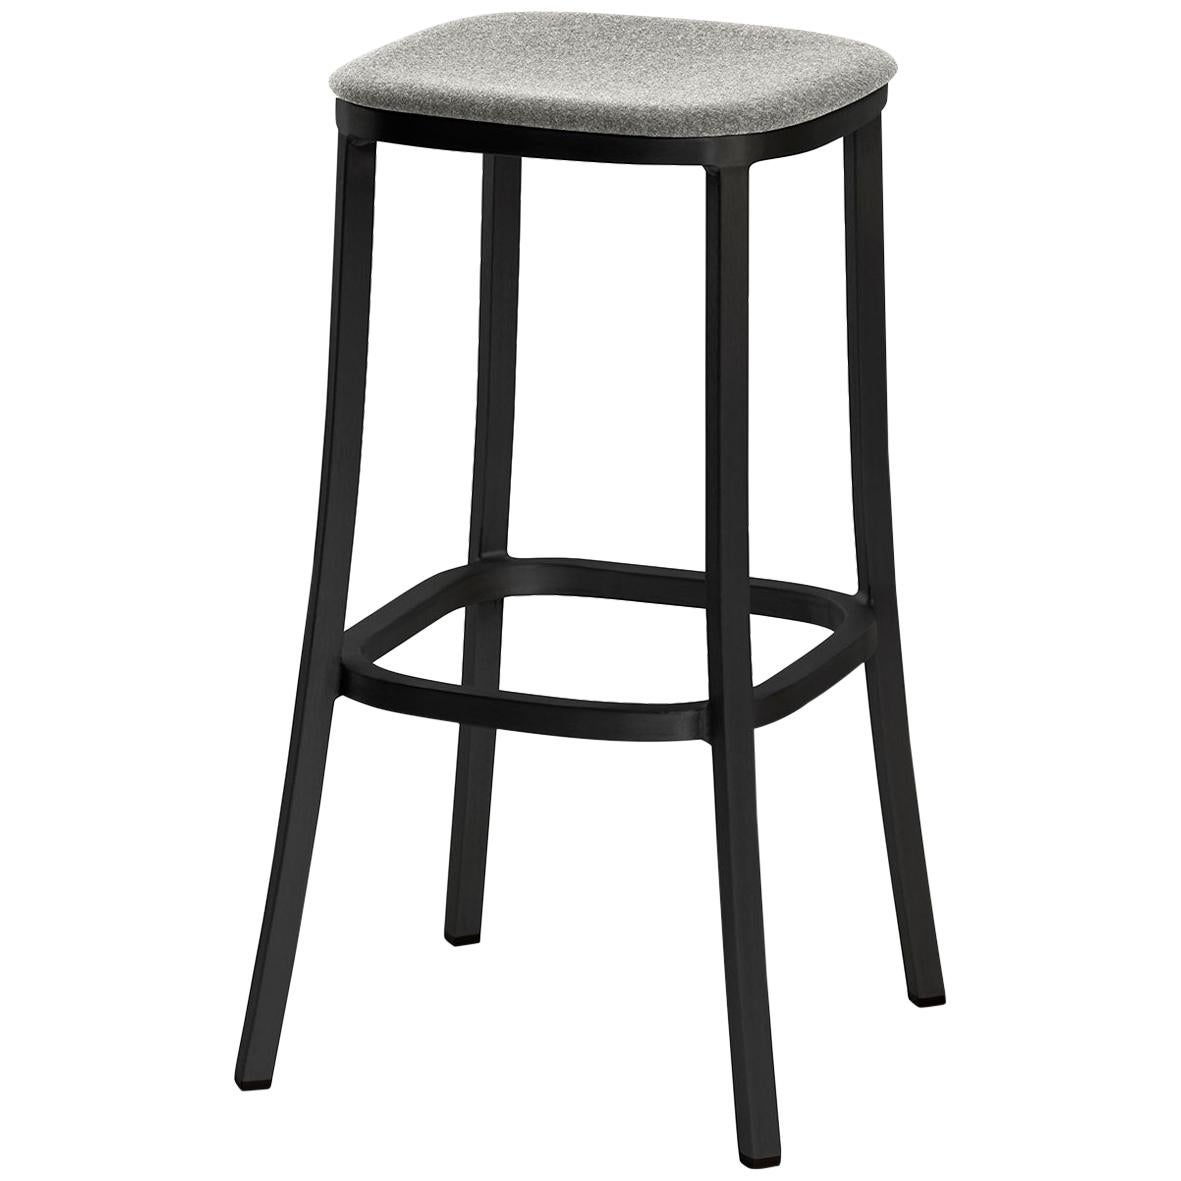 Emeco 1 Inch Barstool with Grey Upholstery & Black Legs by Jasper Morrison For Sale